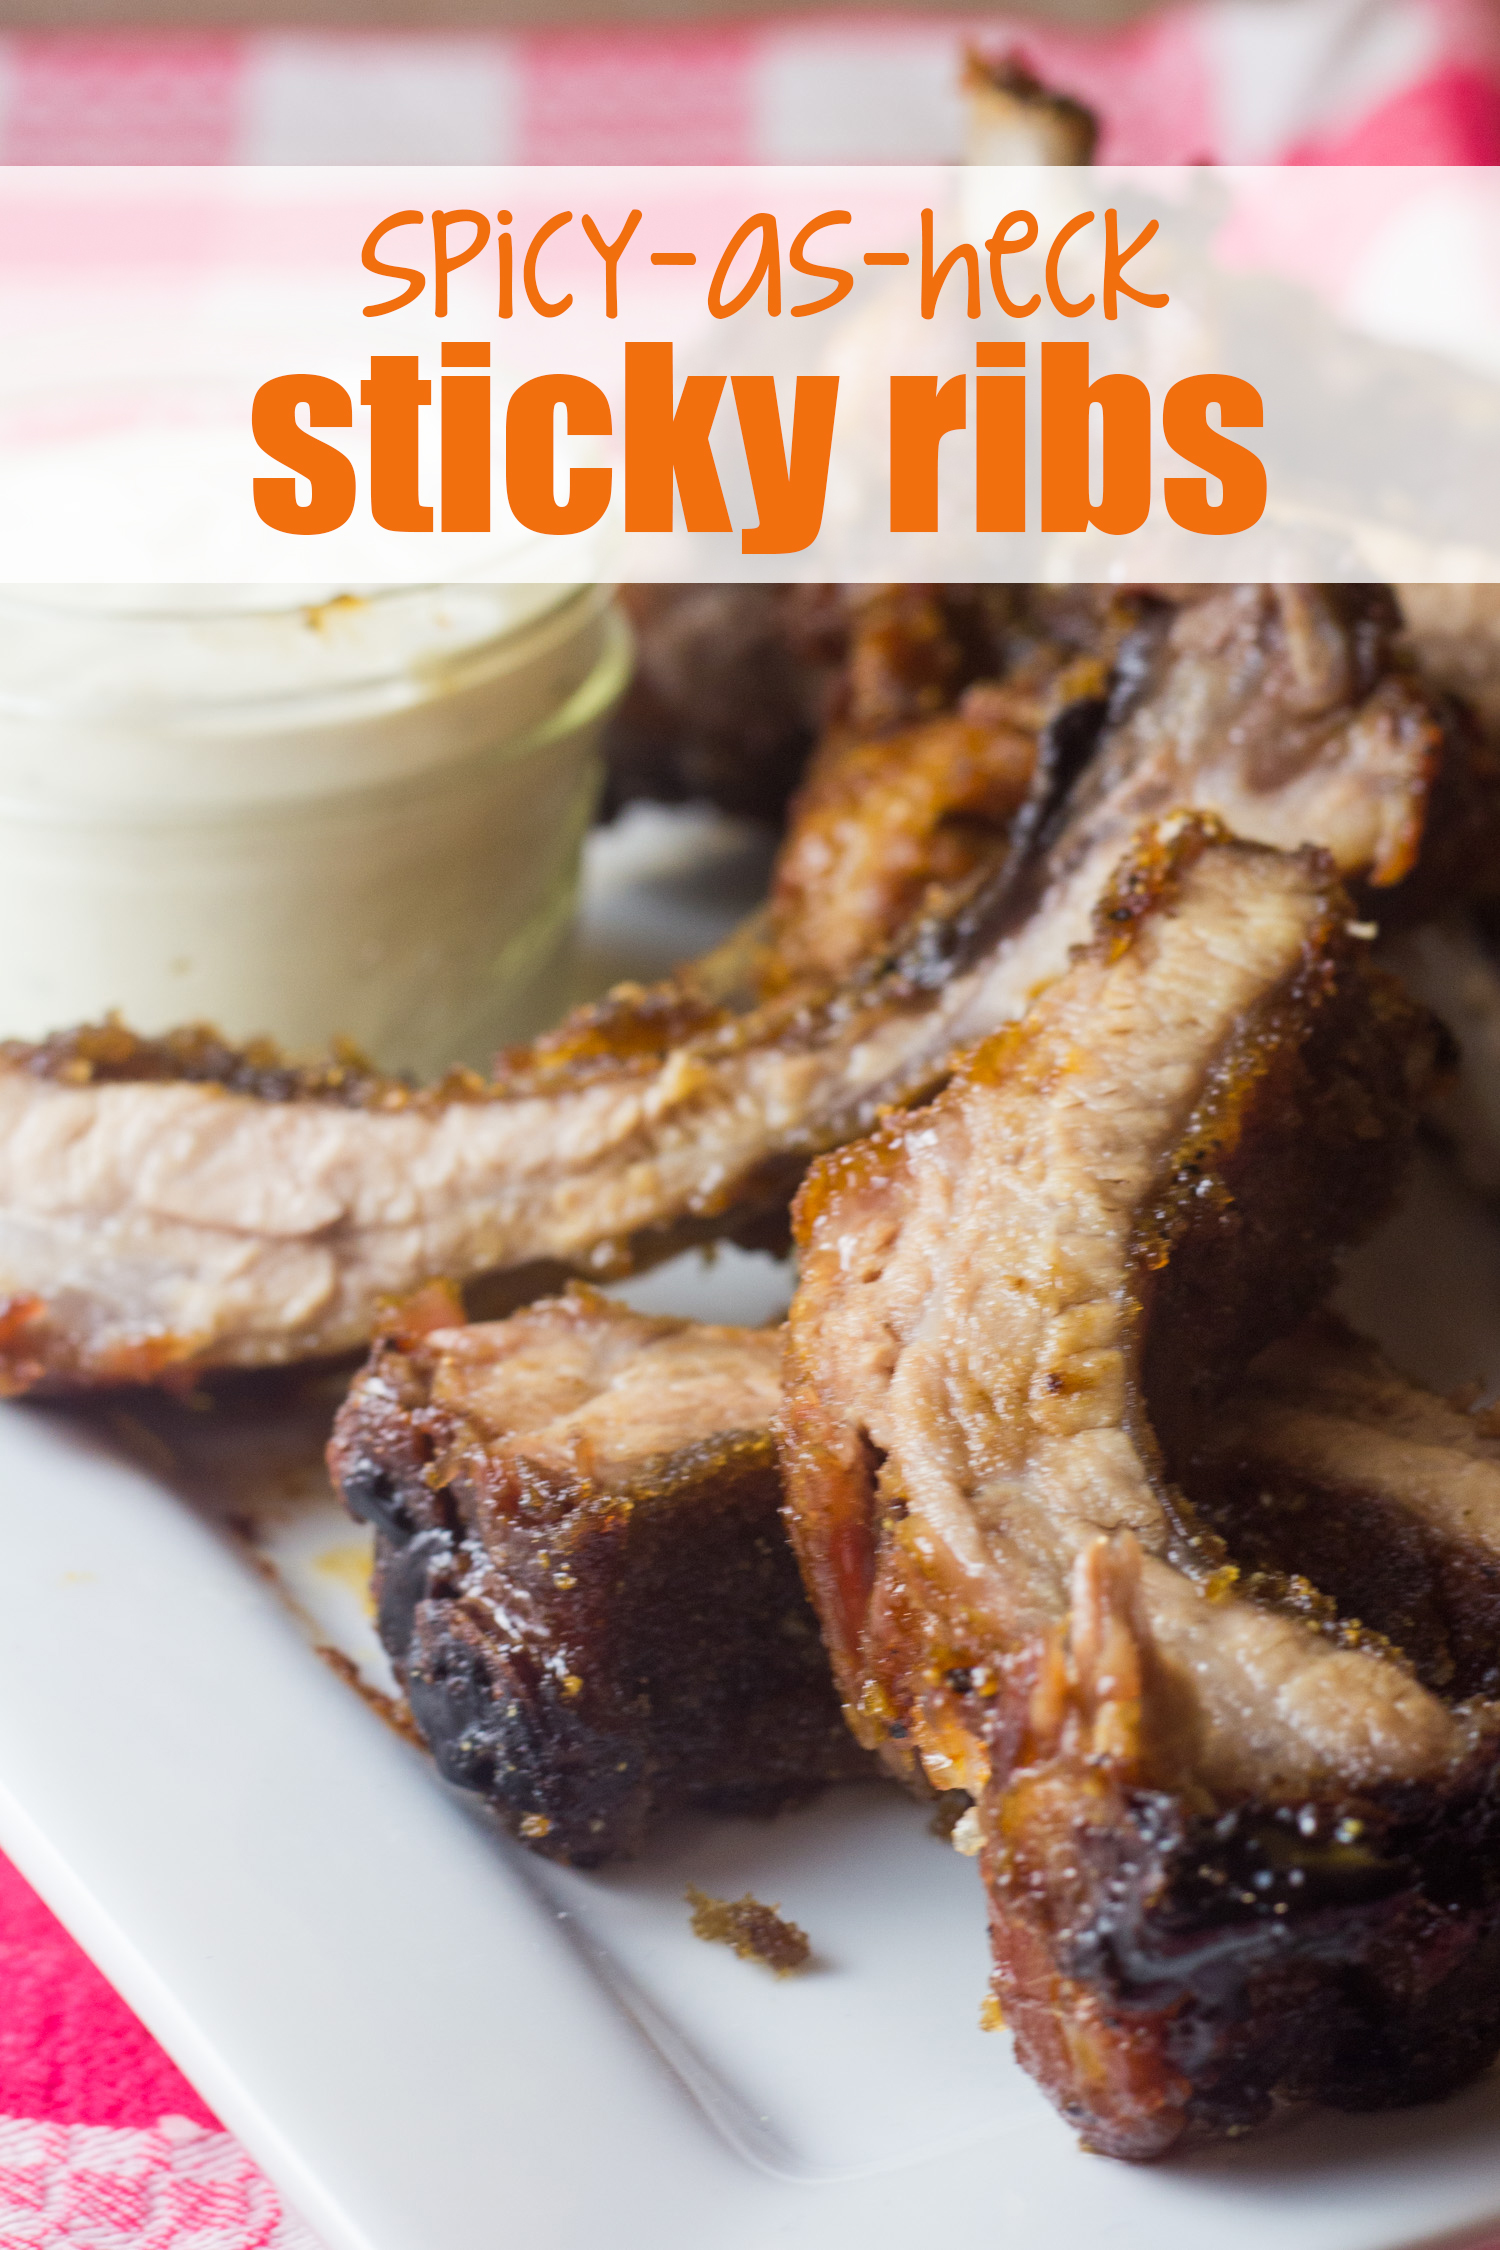 Do you like it hot? These spicy-as-heck sticky ribs are for you, then! A little bit sweet, a lot spicy, and oh-so-finger-licking delicious…. Use your favorite hot sauce to really kick up the heat level more, and more, and more for these spicy ribs you can make in your oven at home! Tone down the spice with a little sweet brown sugar, and you’ve got a meal that will stick to your own ribs, and your fingers, in the most delicious way. | oven-baked ribs | spicy ribs | sweet ribs | barbecue ribs | baby-back ribs |